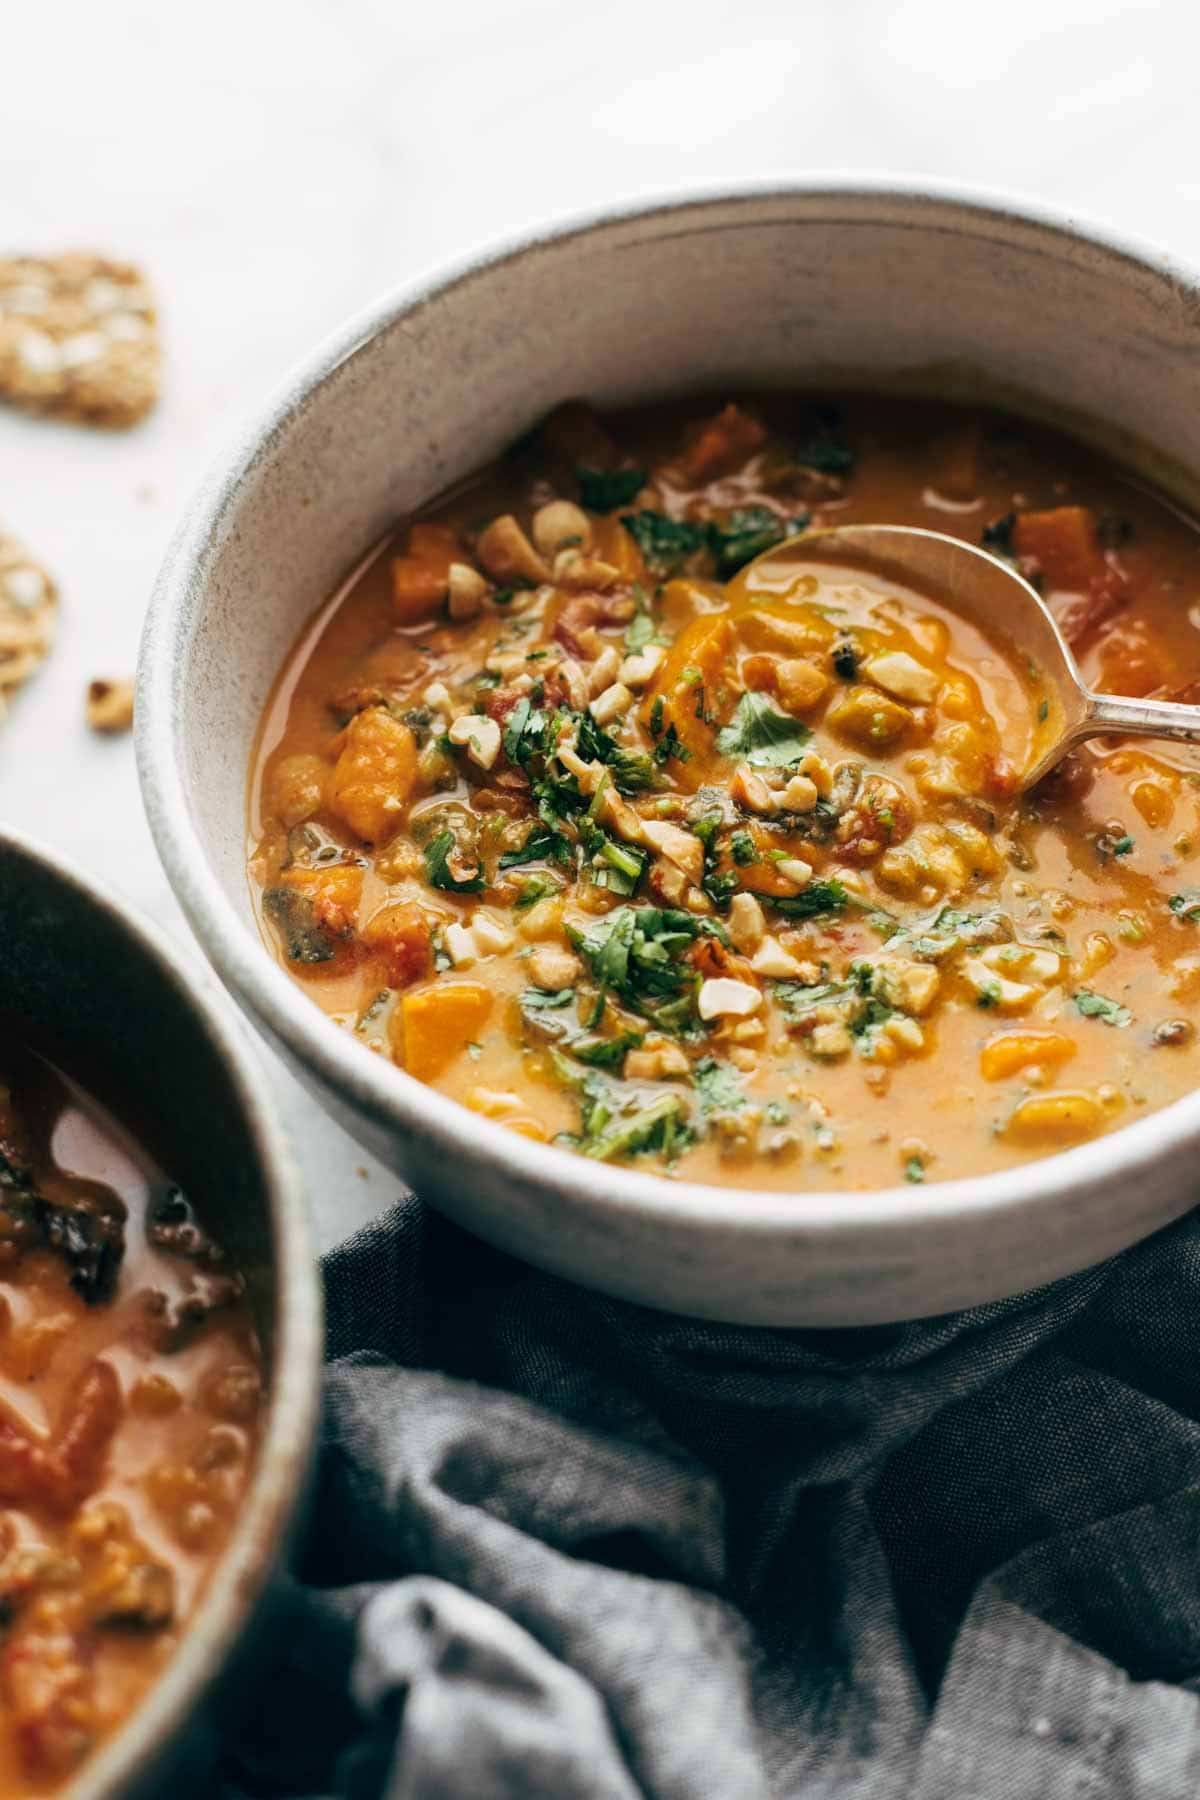 Spoonful of Spicy Peanut Soup.